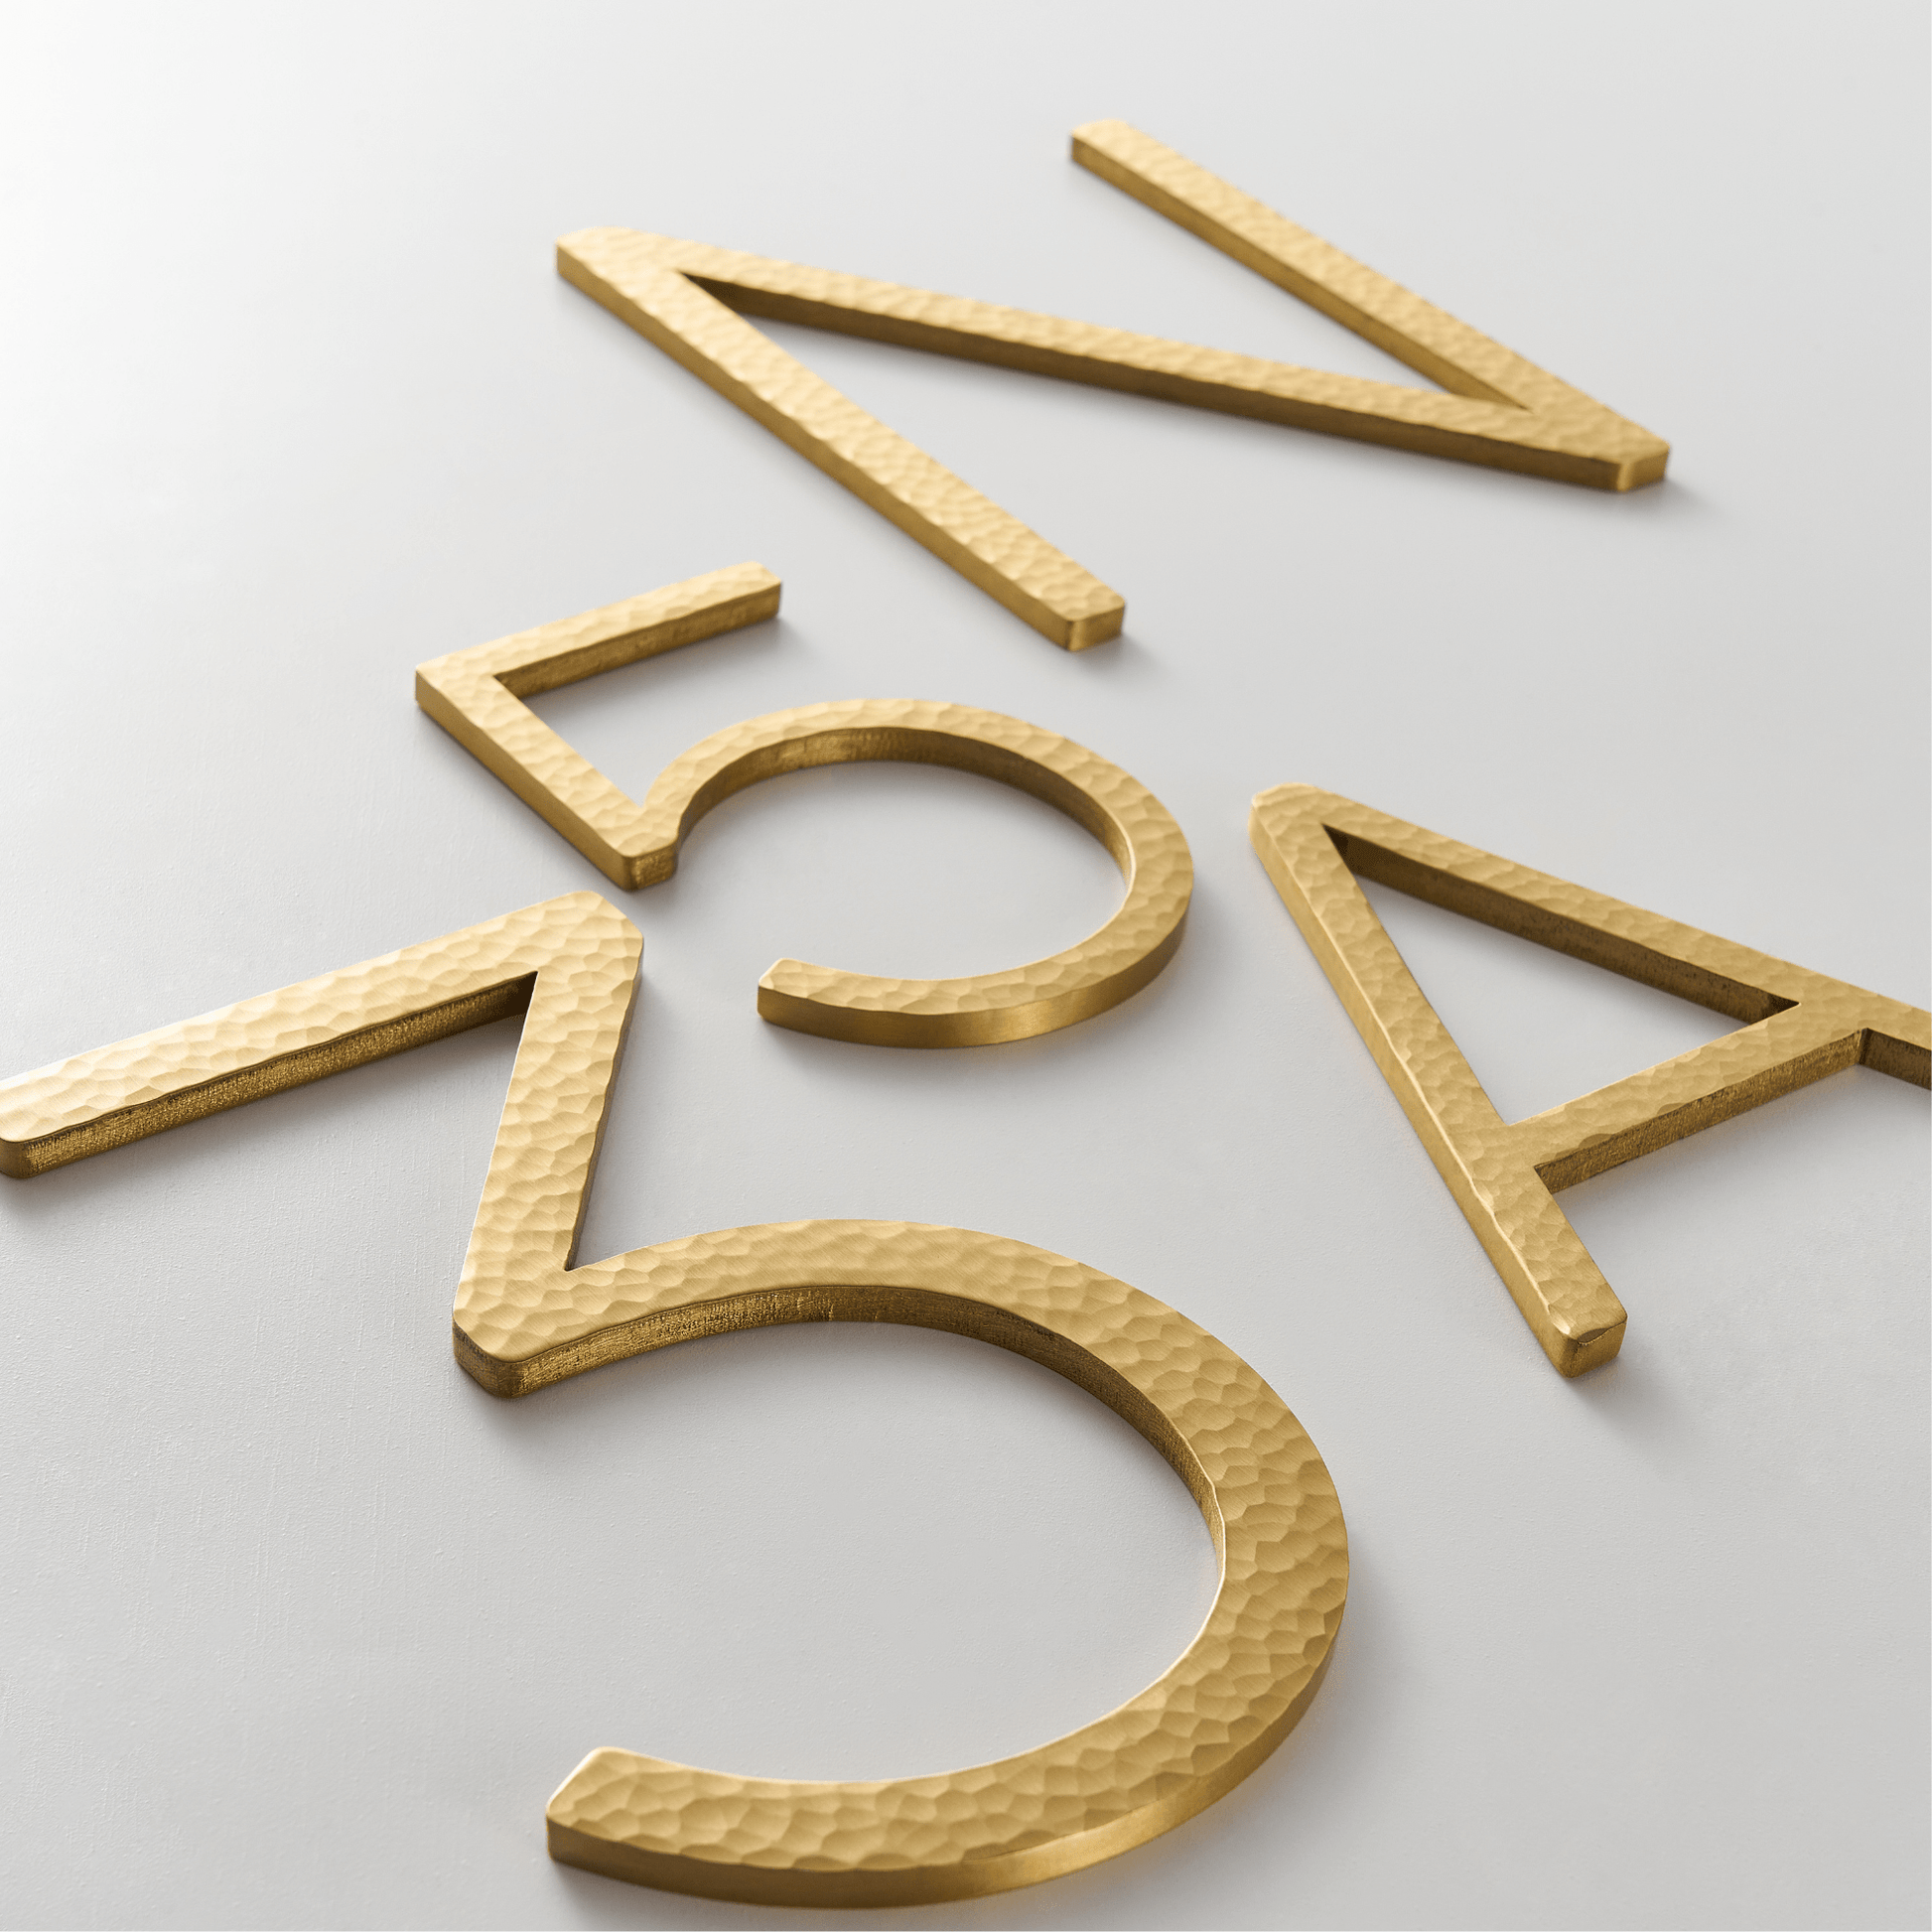 House Numbers and Letters Bayside Luxe Signage - Hammered Satin Brass Floating Numbers and Letters - Noosa 10cm